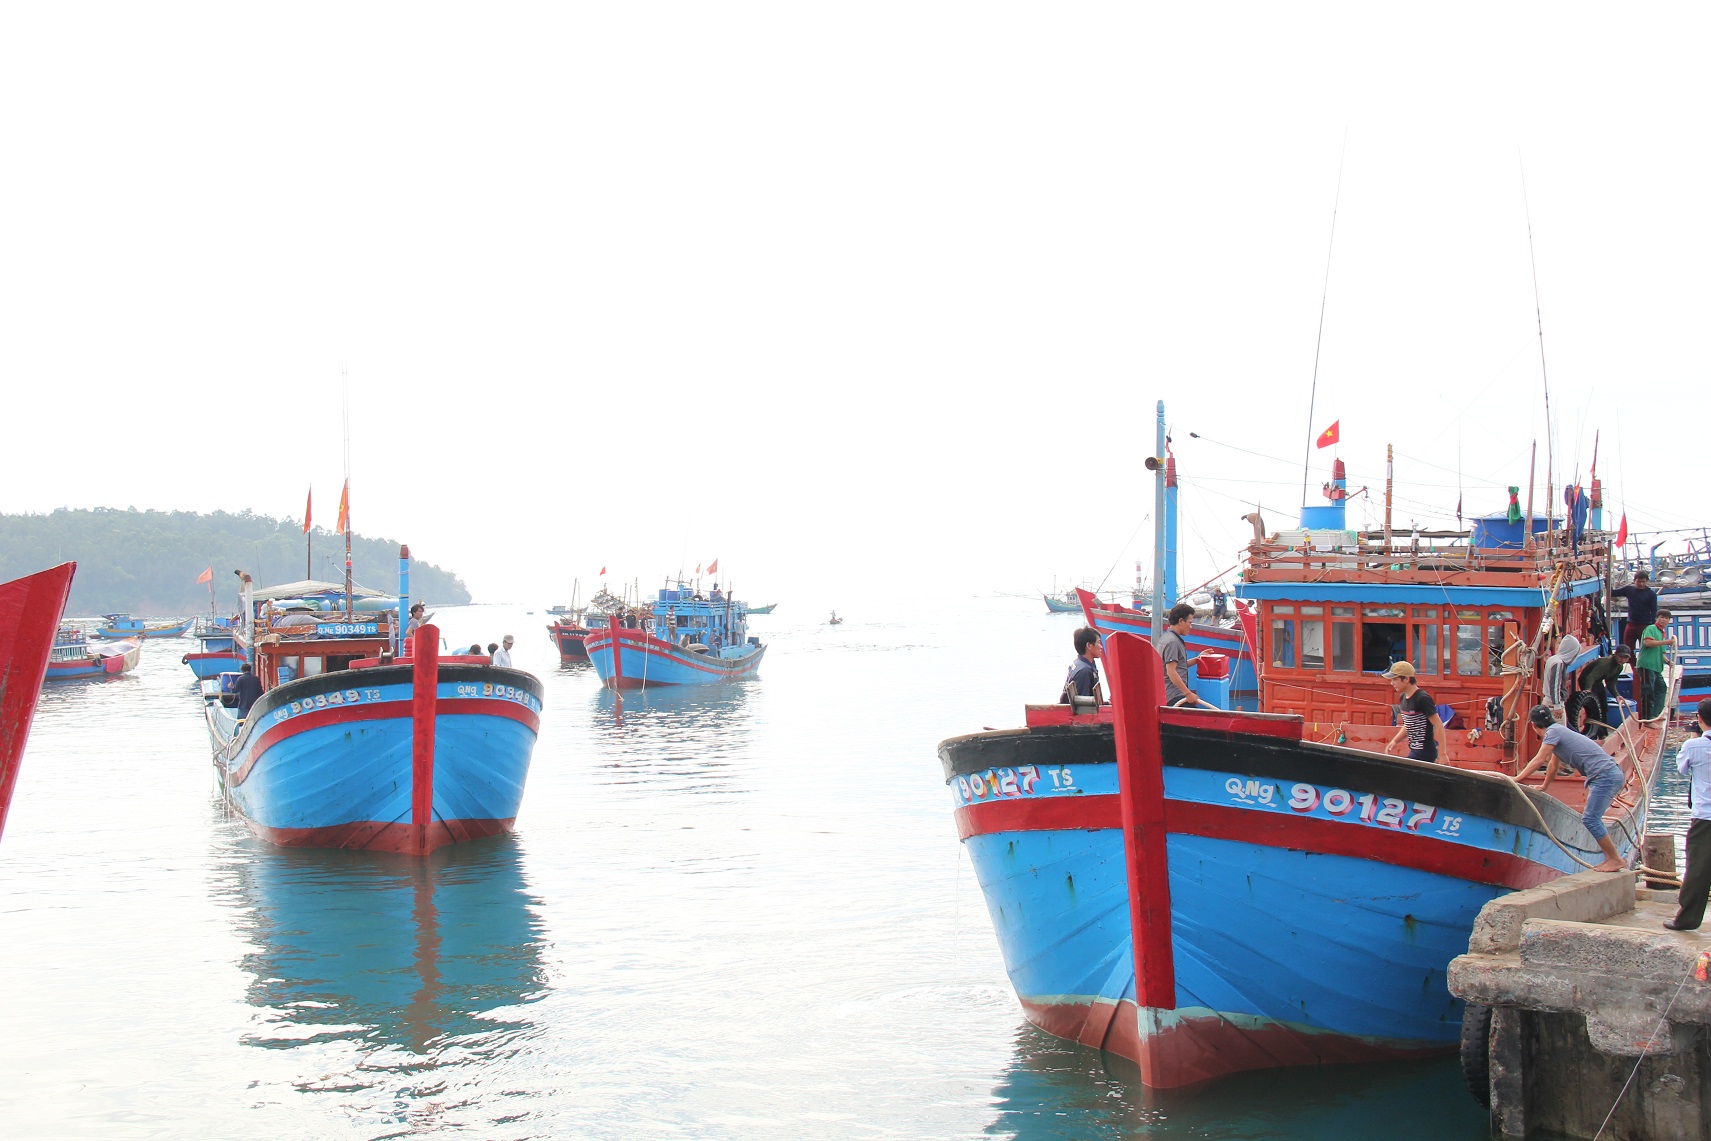 Vietnamese authorities search for vessel that sank local fishing boat